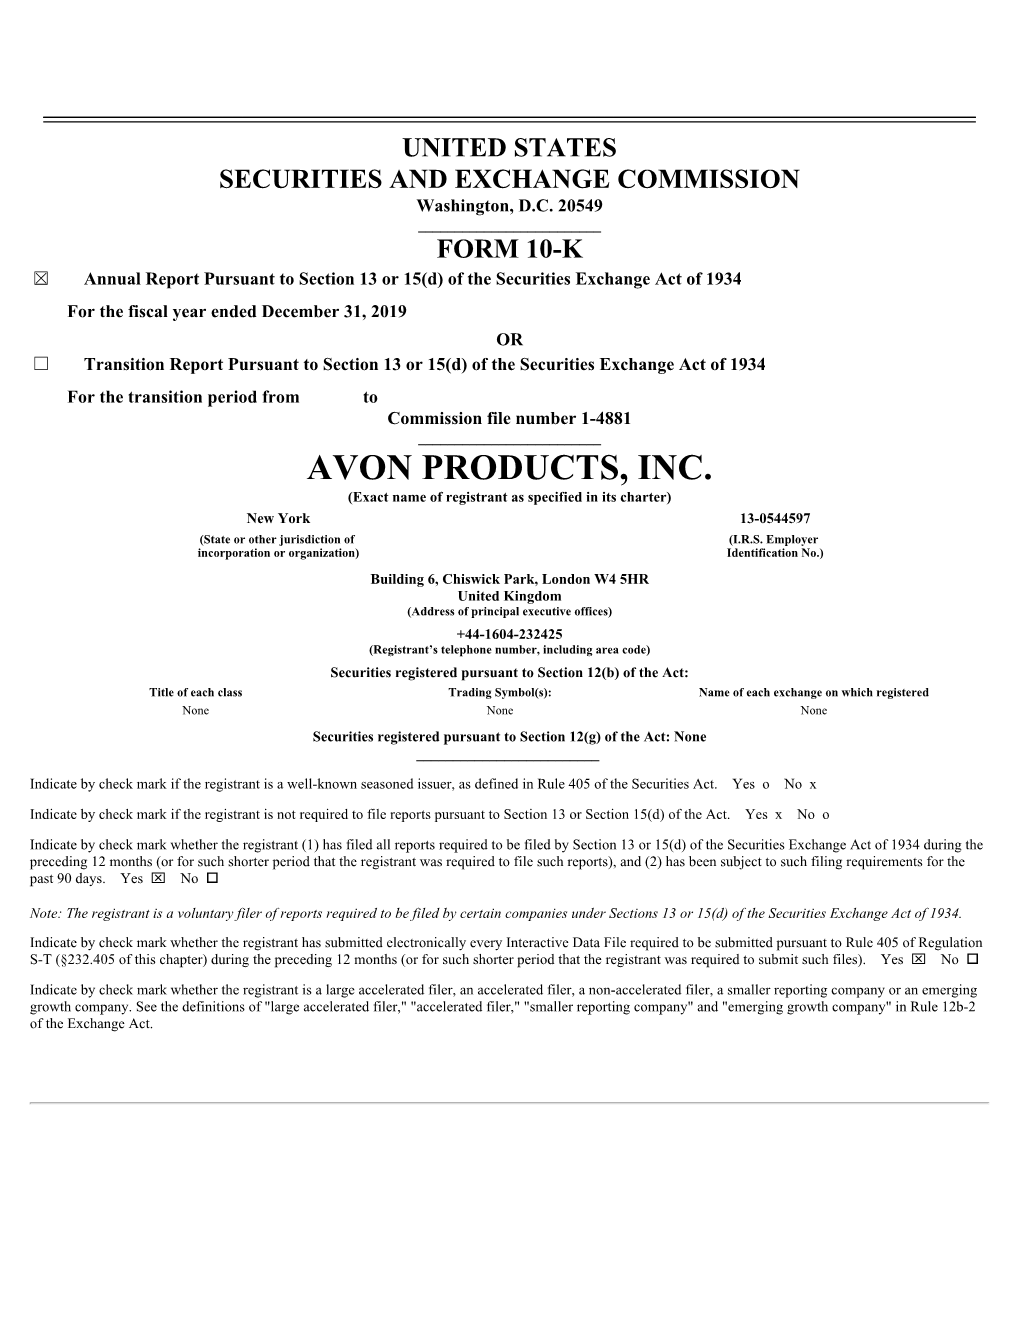 AVON PRODUCTS, INC. (Exact Name of Registrant As Specified in Its Charter) New York 13-0544597 (State Or Other Jurisdiction of (I.R.S